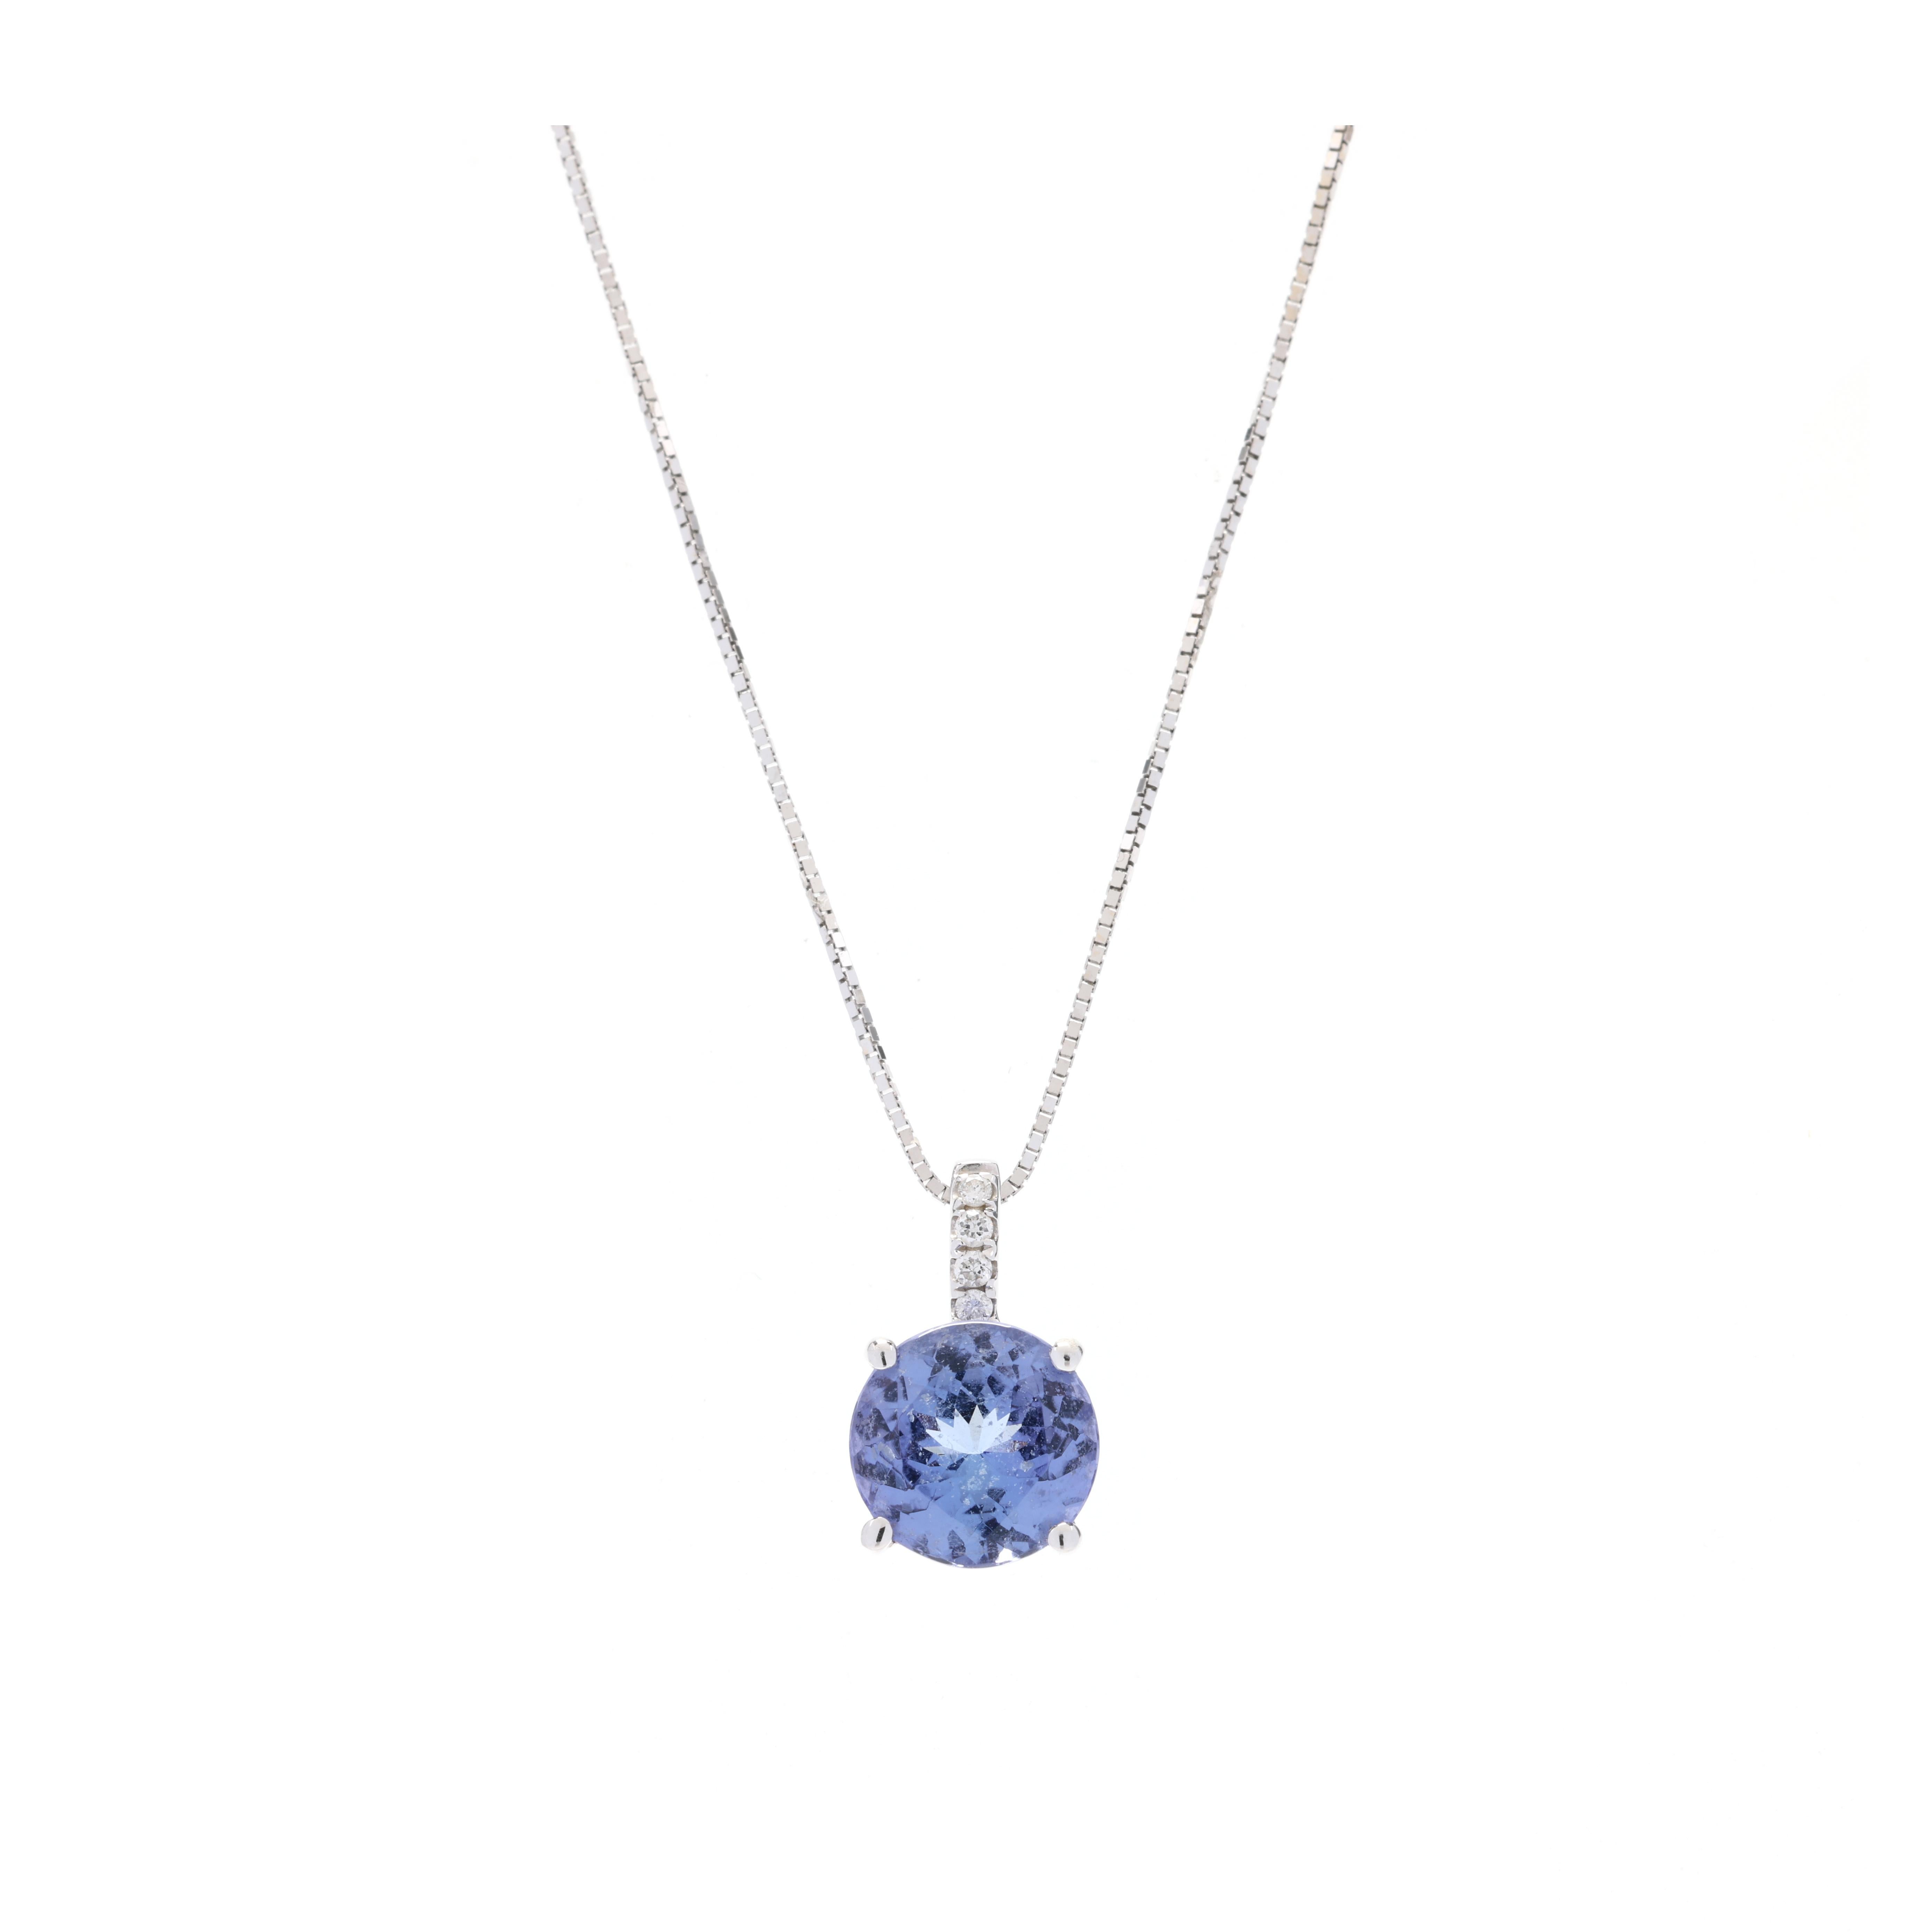 1.42ctw Diamond and Tanzanite Pendant Necklace, 14k White Gold, Length 18 Inches In Good Condition For Sale In McLeansville, NC